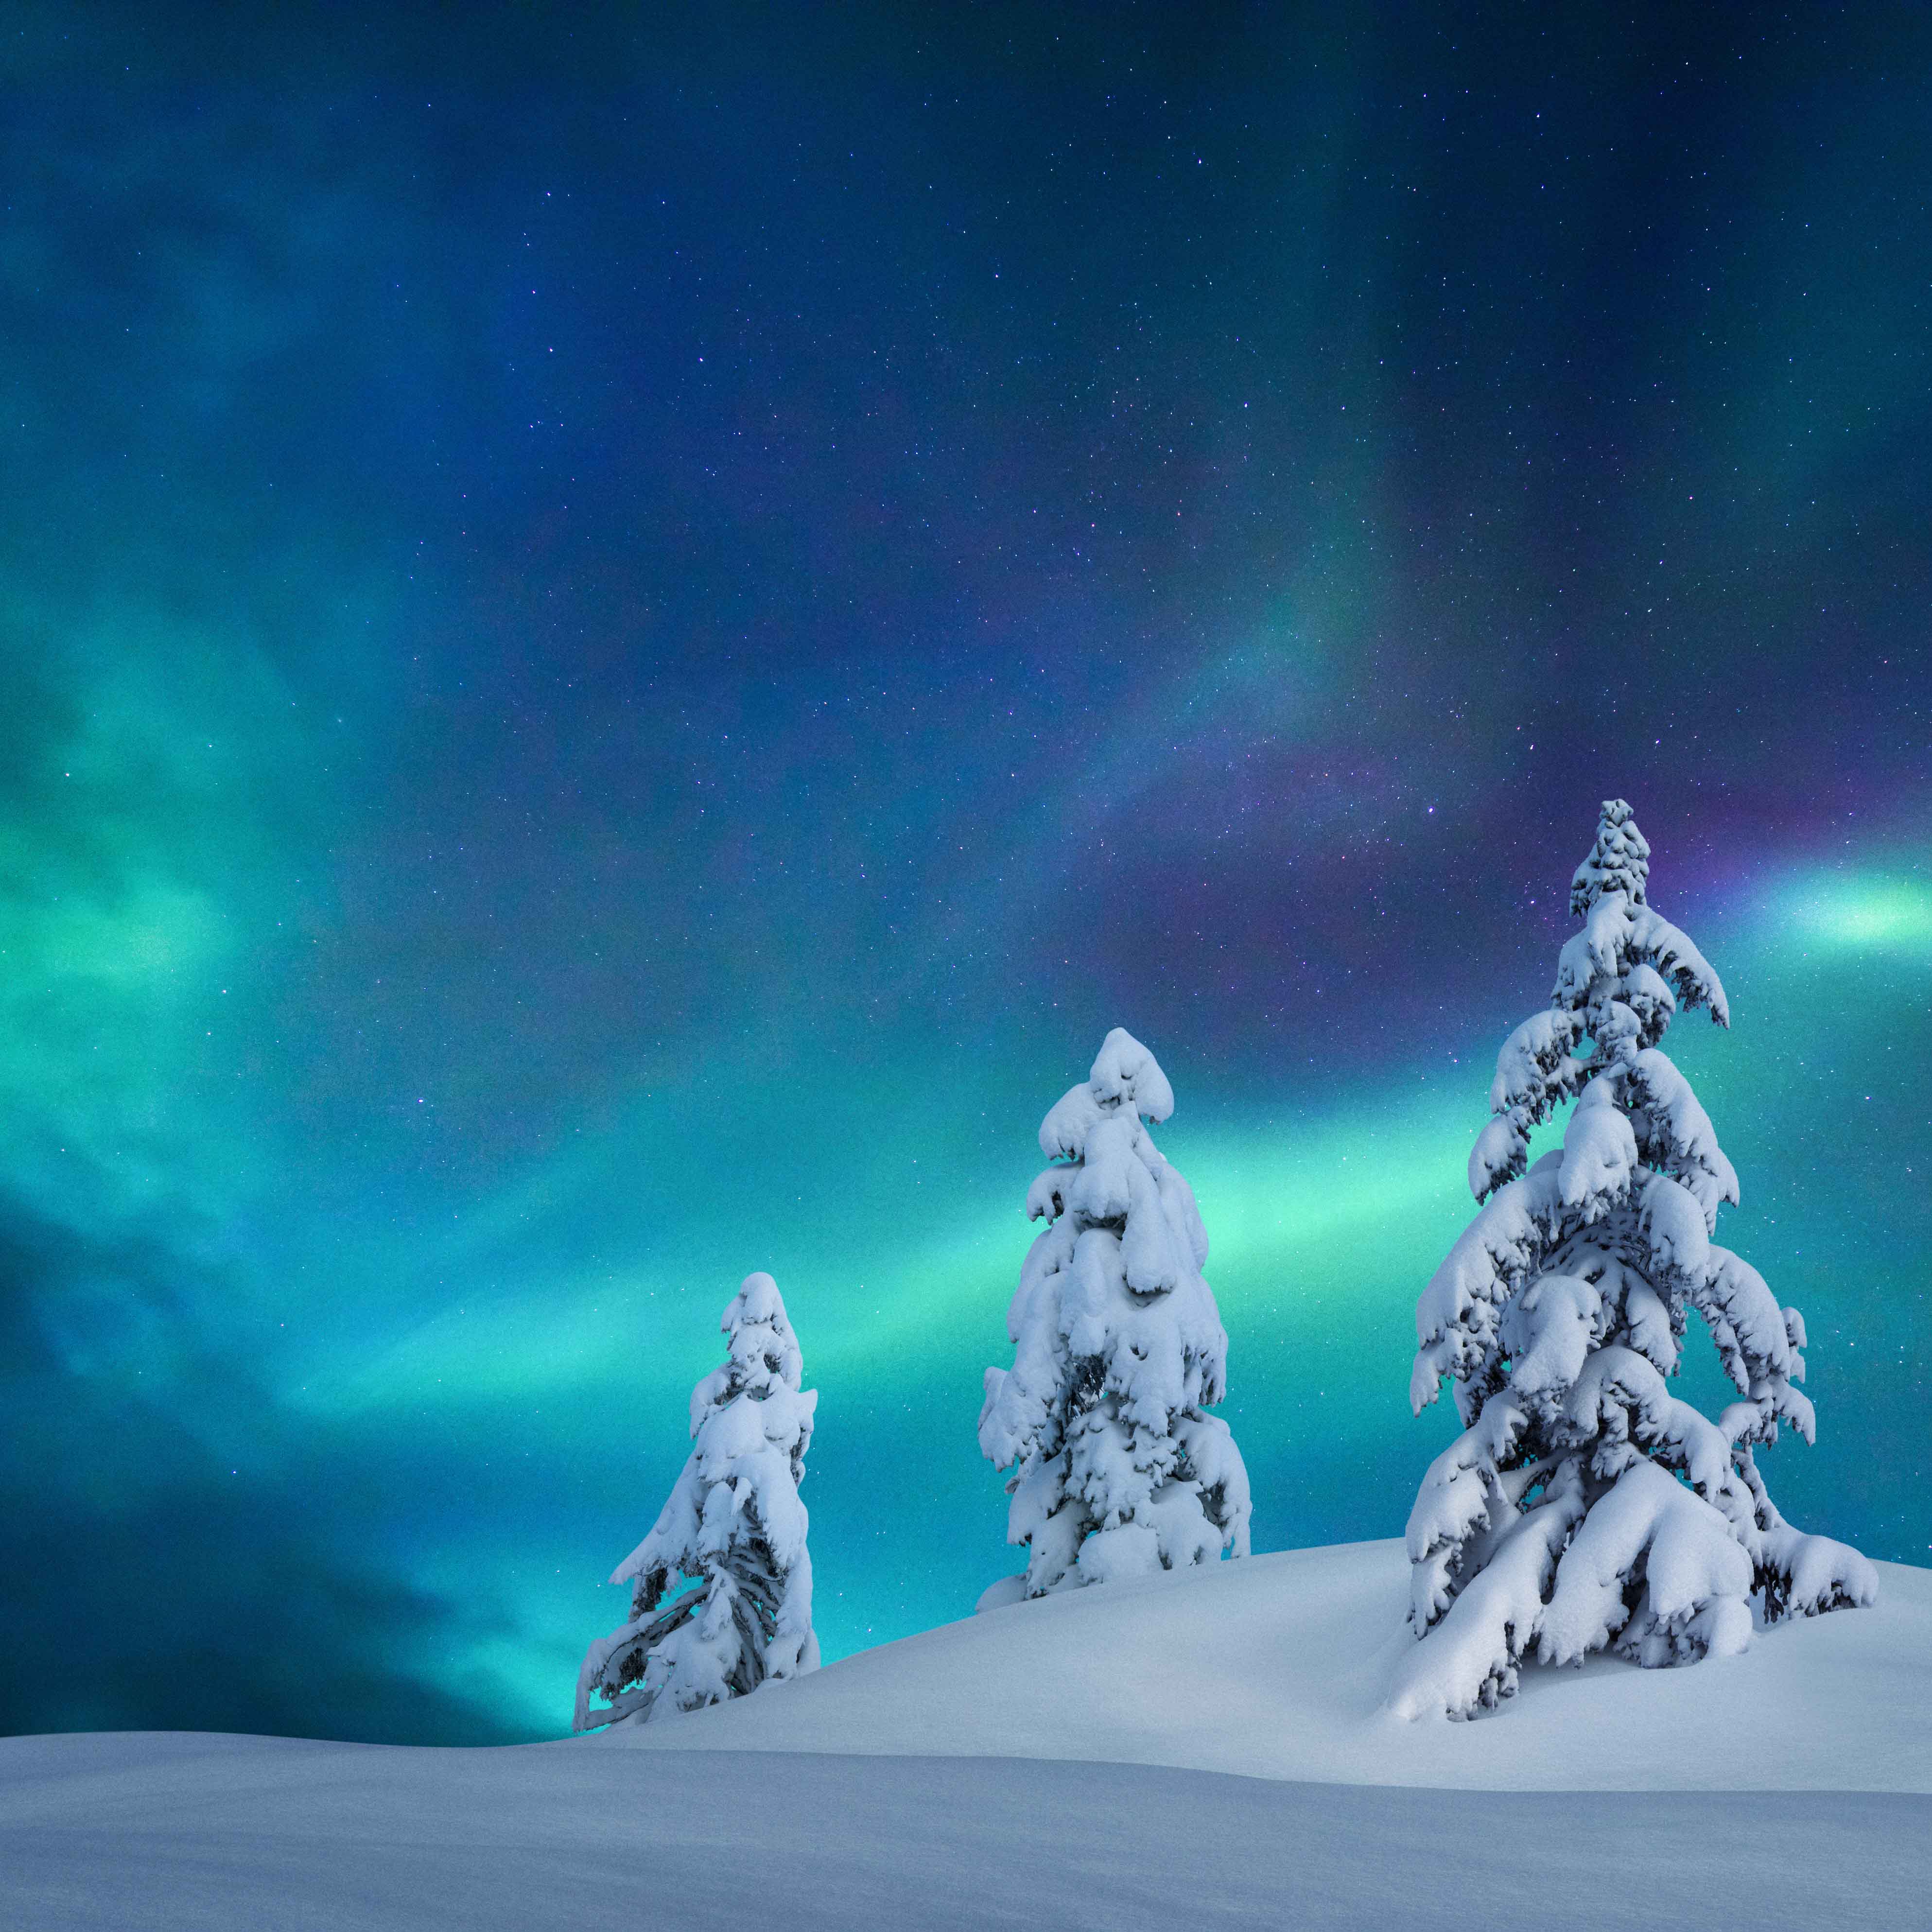 Lapland Luxury curates a memorable and luxurious adventure in beautiful Lapland